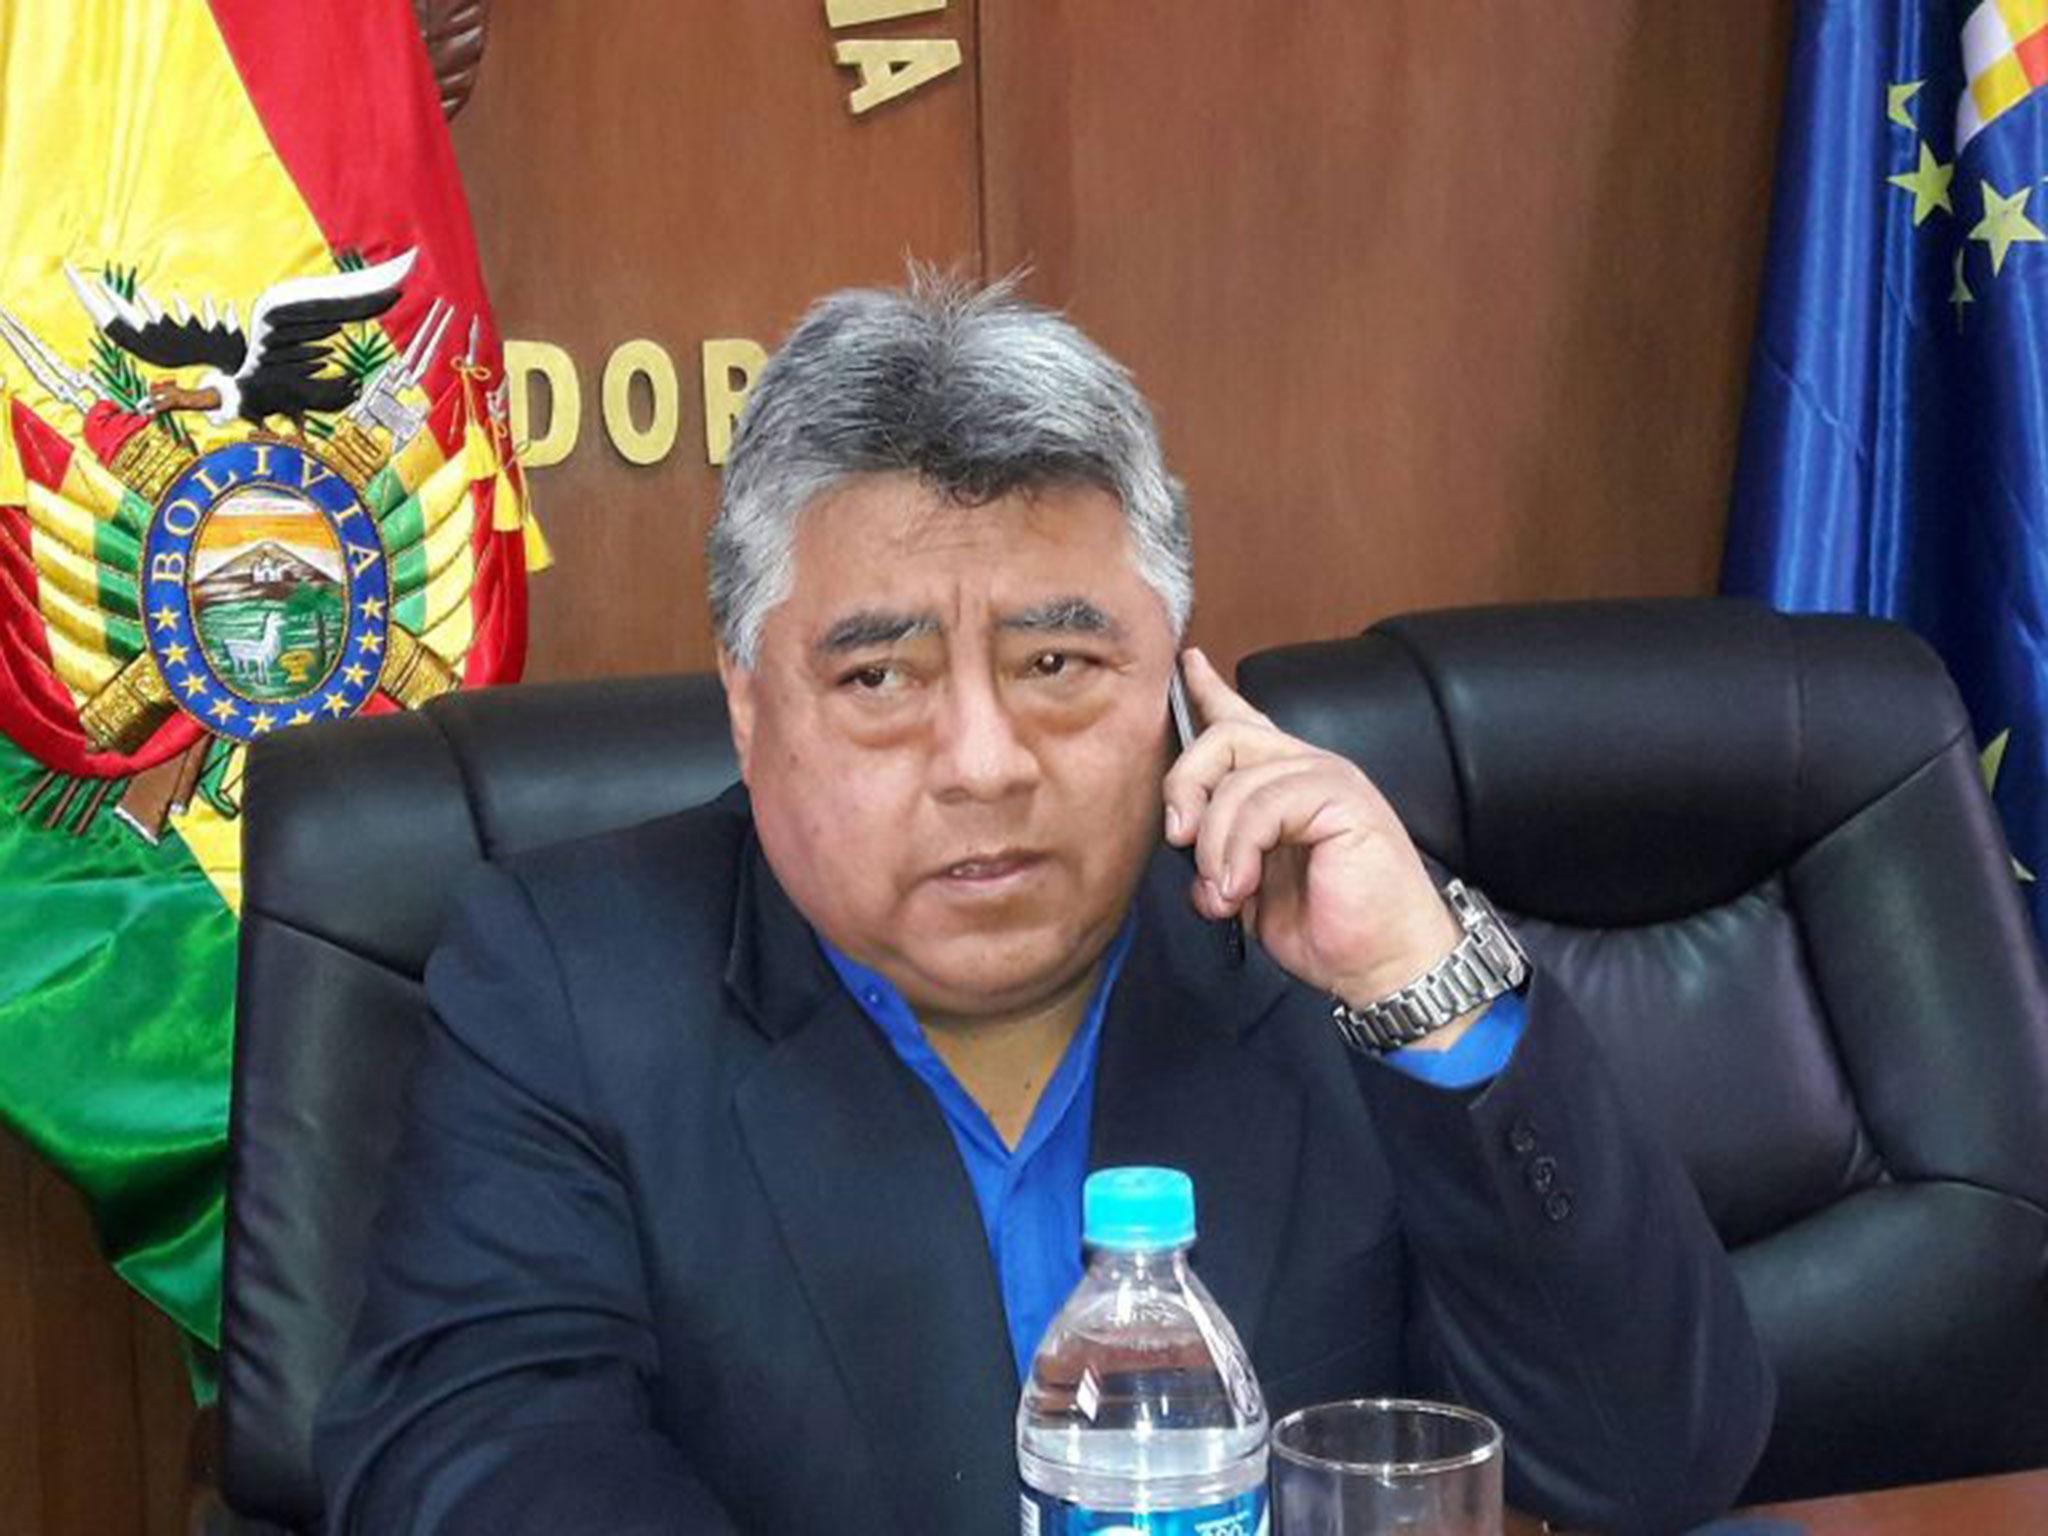 Bolivian deputy interior minister Rodolfo Illanes was kidnapped as he attempted to open negotiations